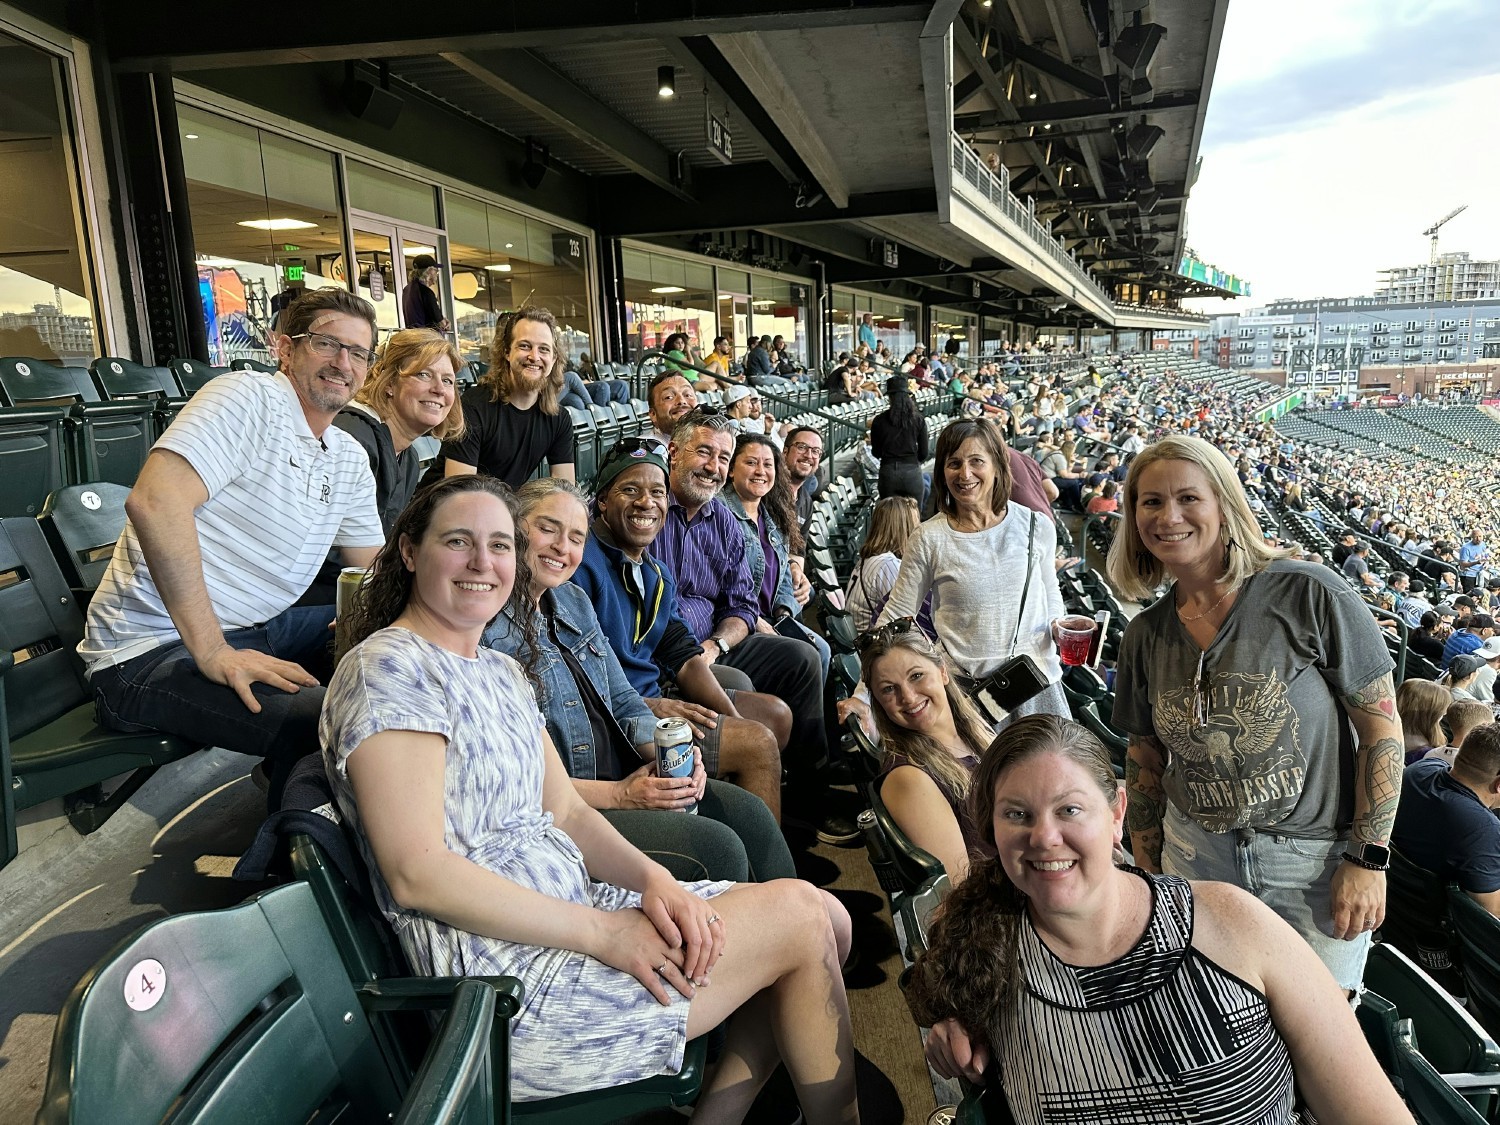 We often enjoy team happy hours followed by a Colorado Rockies game. Extra big smiles for a Rockies win!